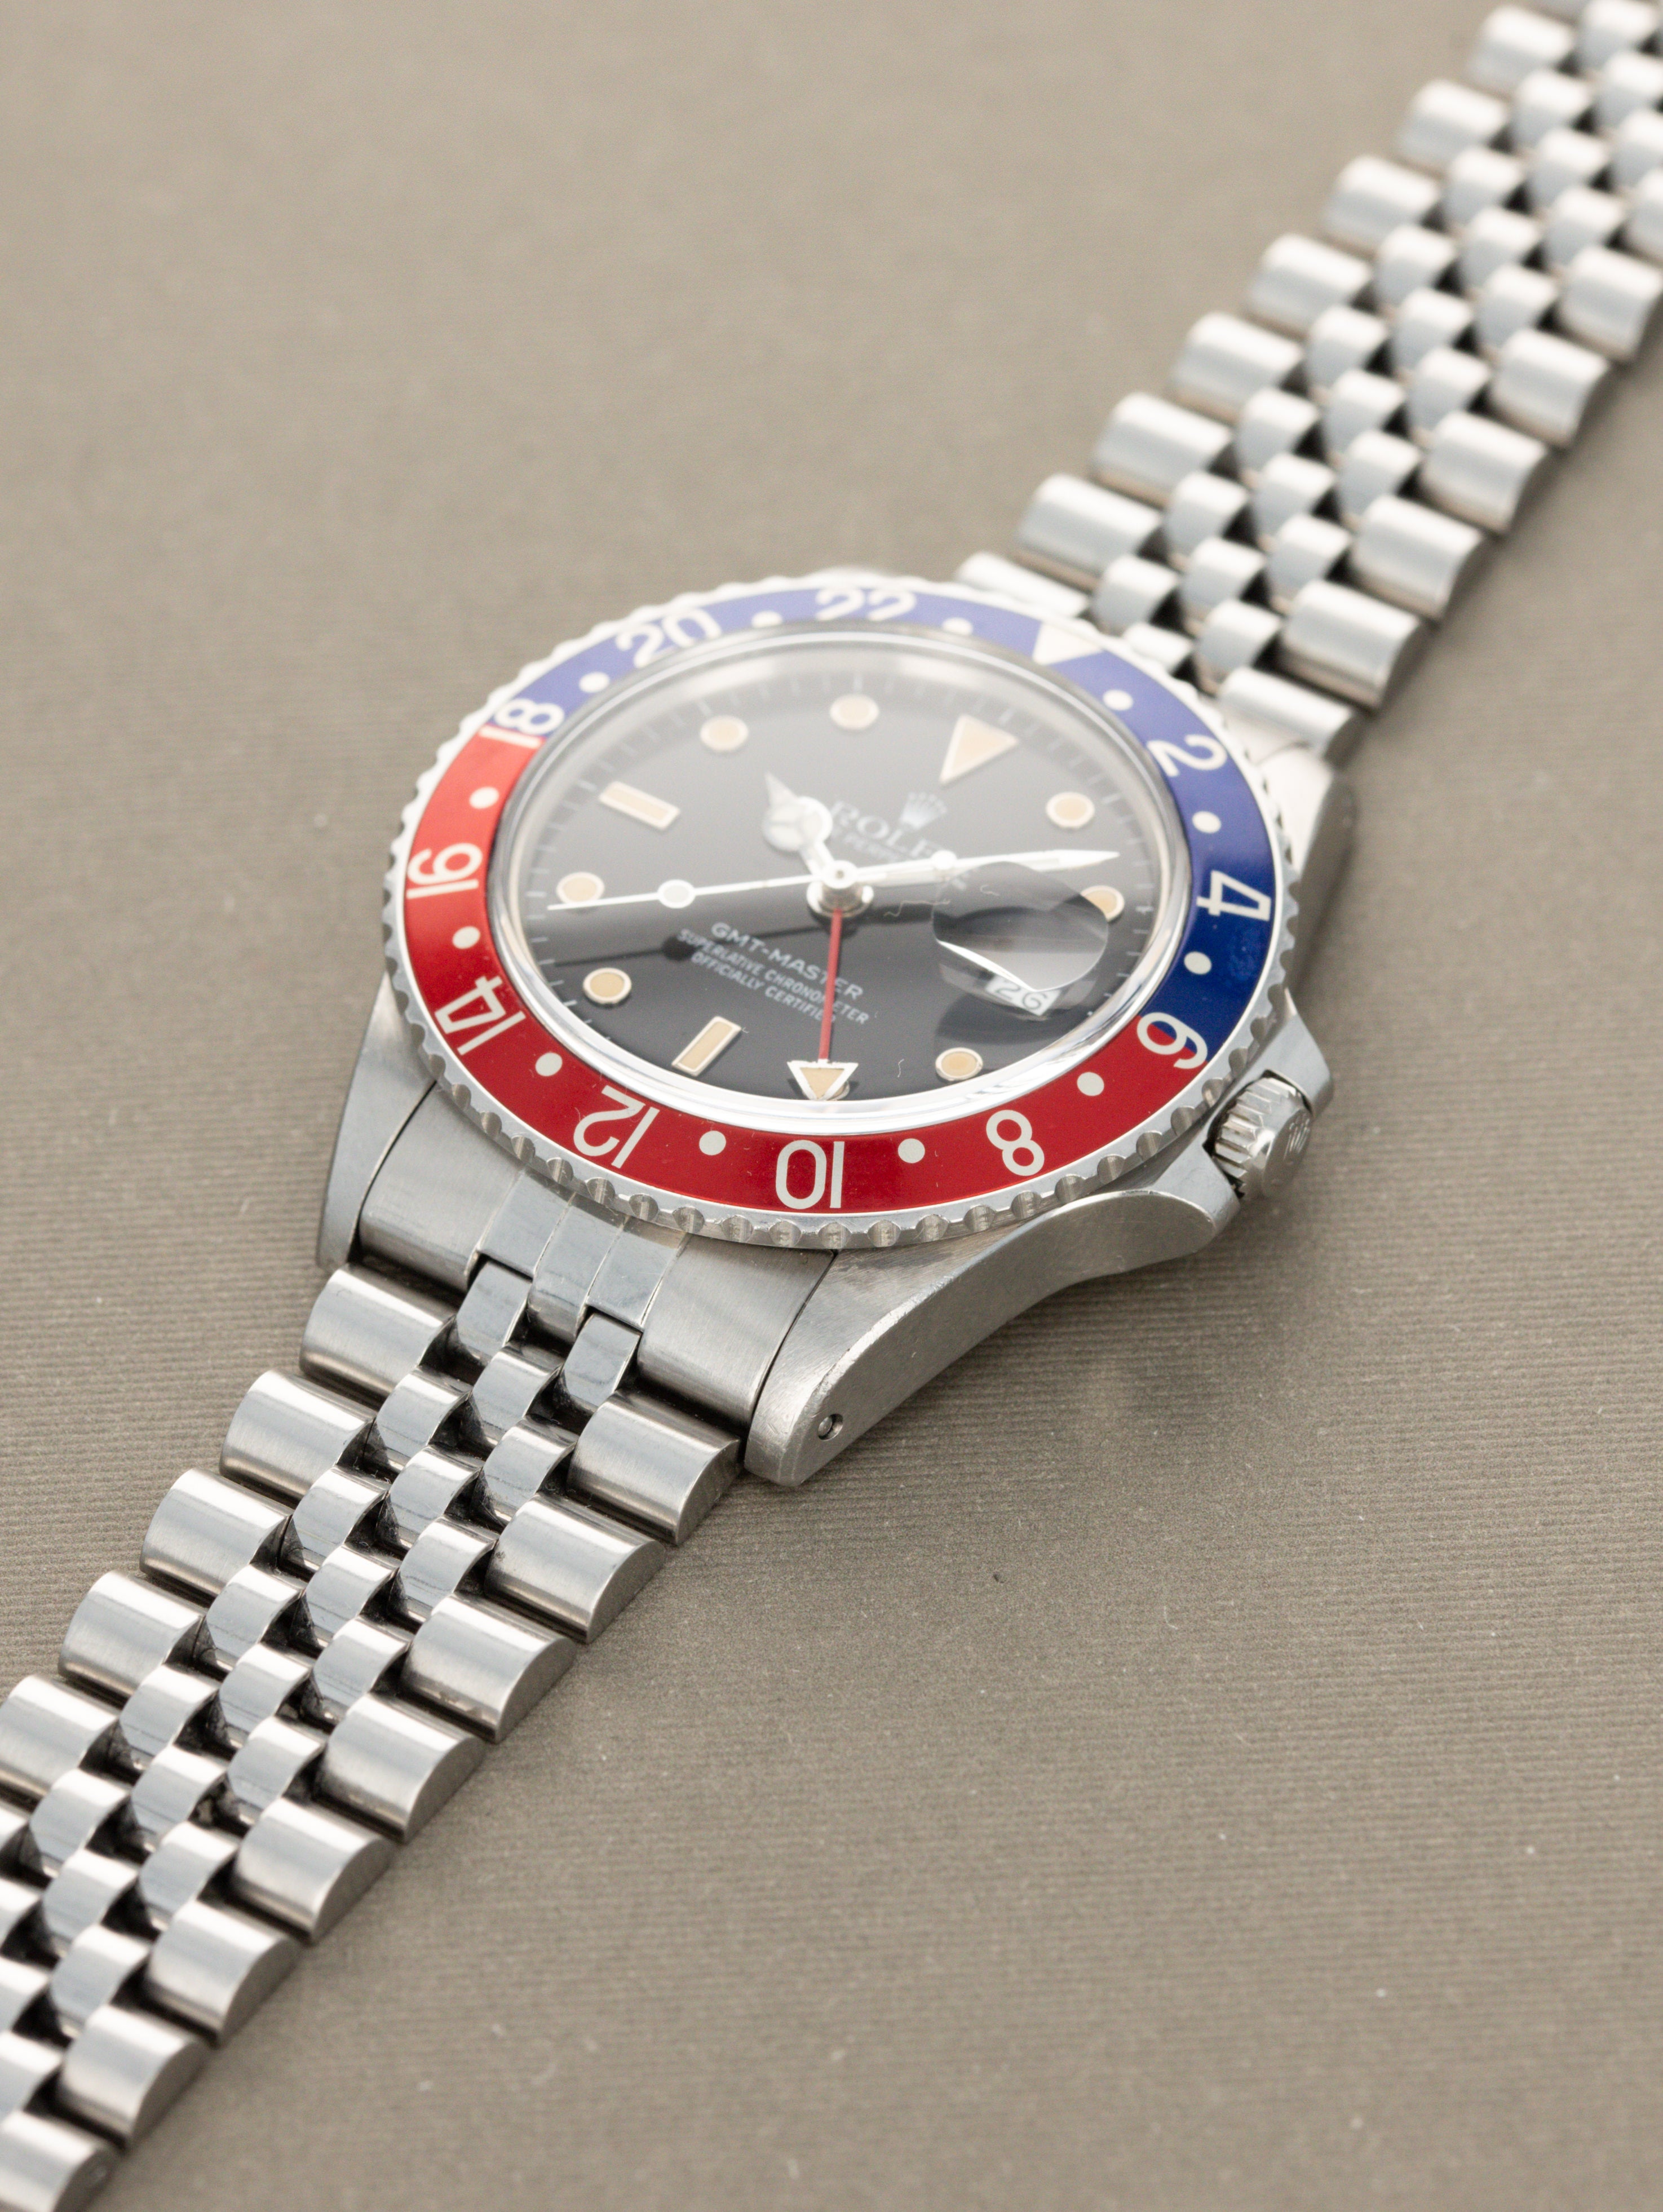 Rolex GMT-Master Ref. 16750 'Pepsi' - Transitional Gloss Dial Unpolished